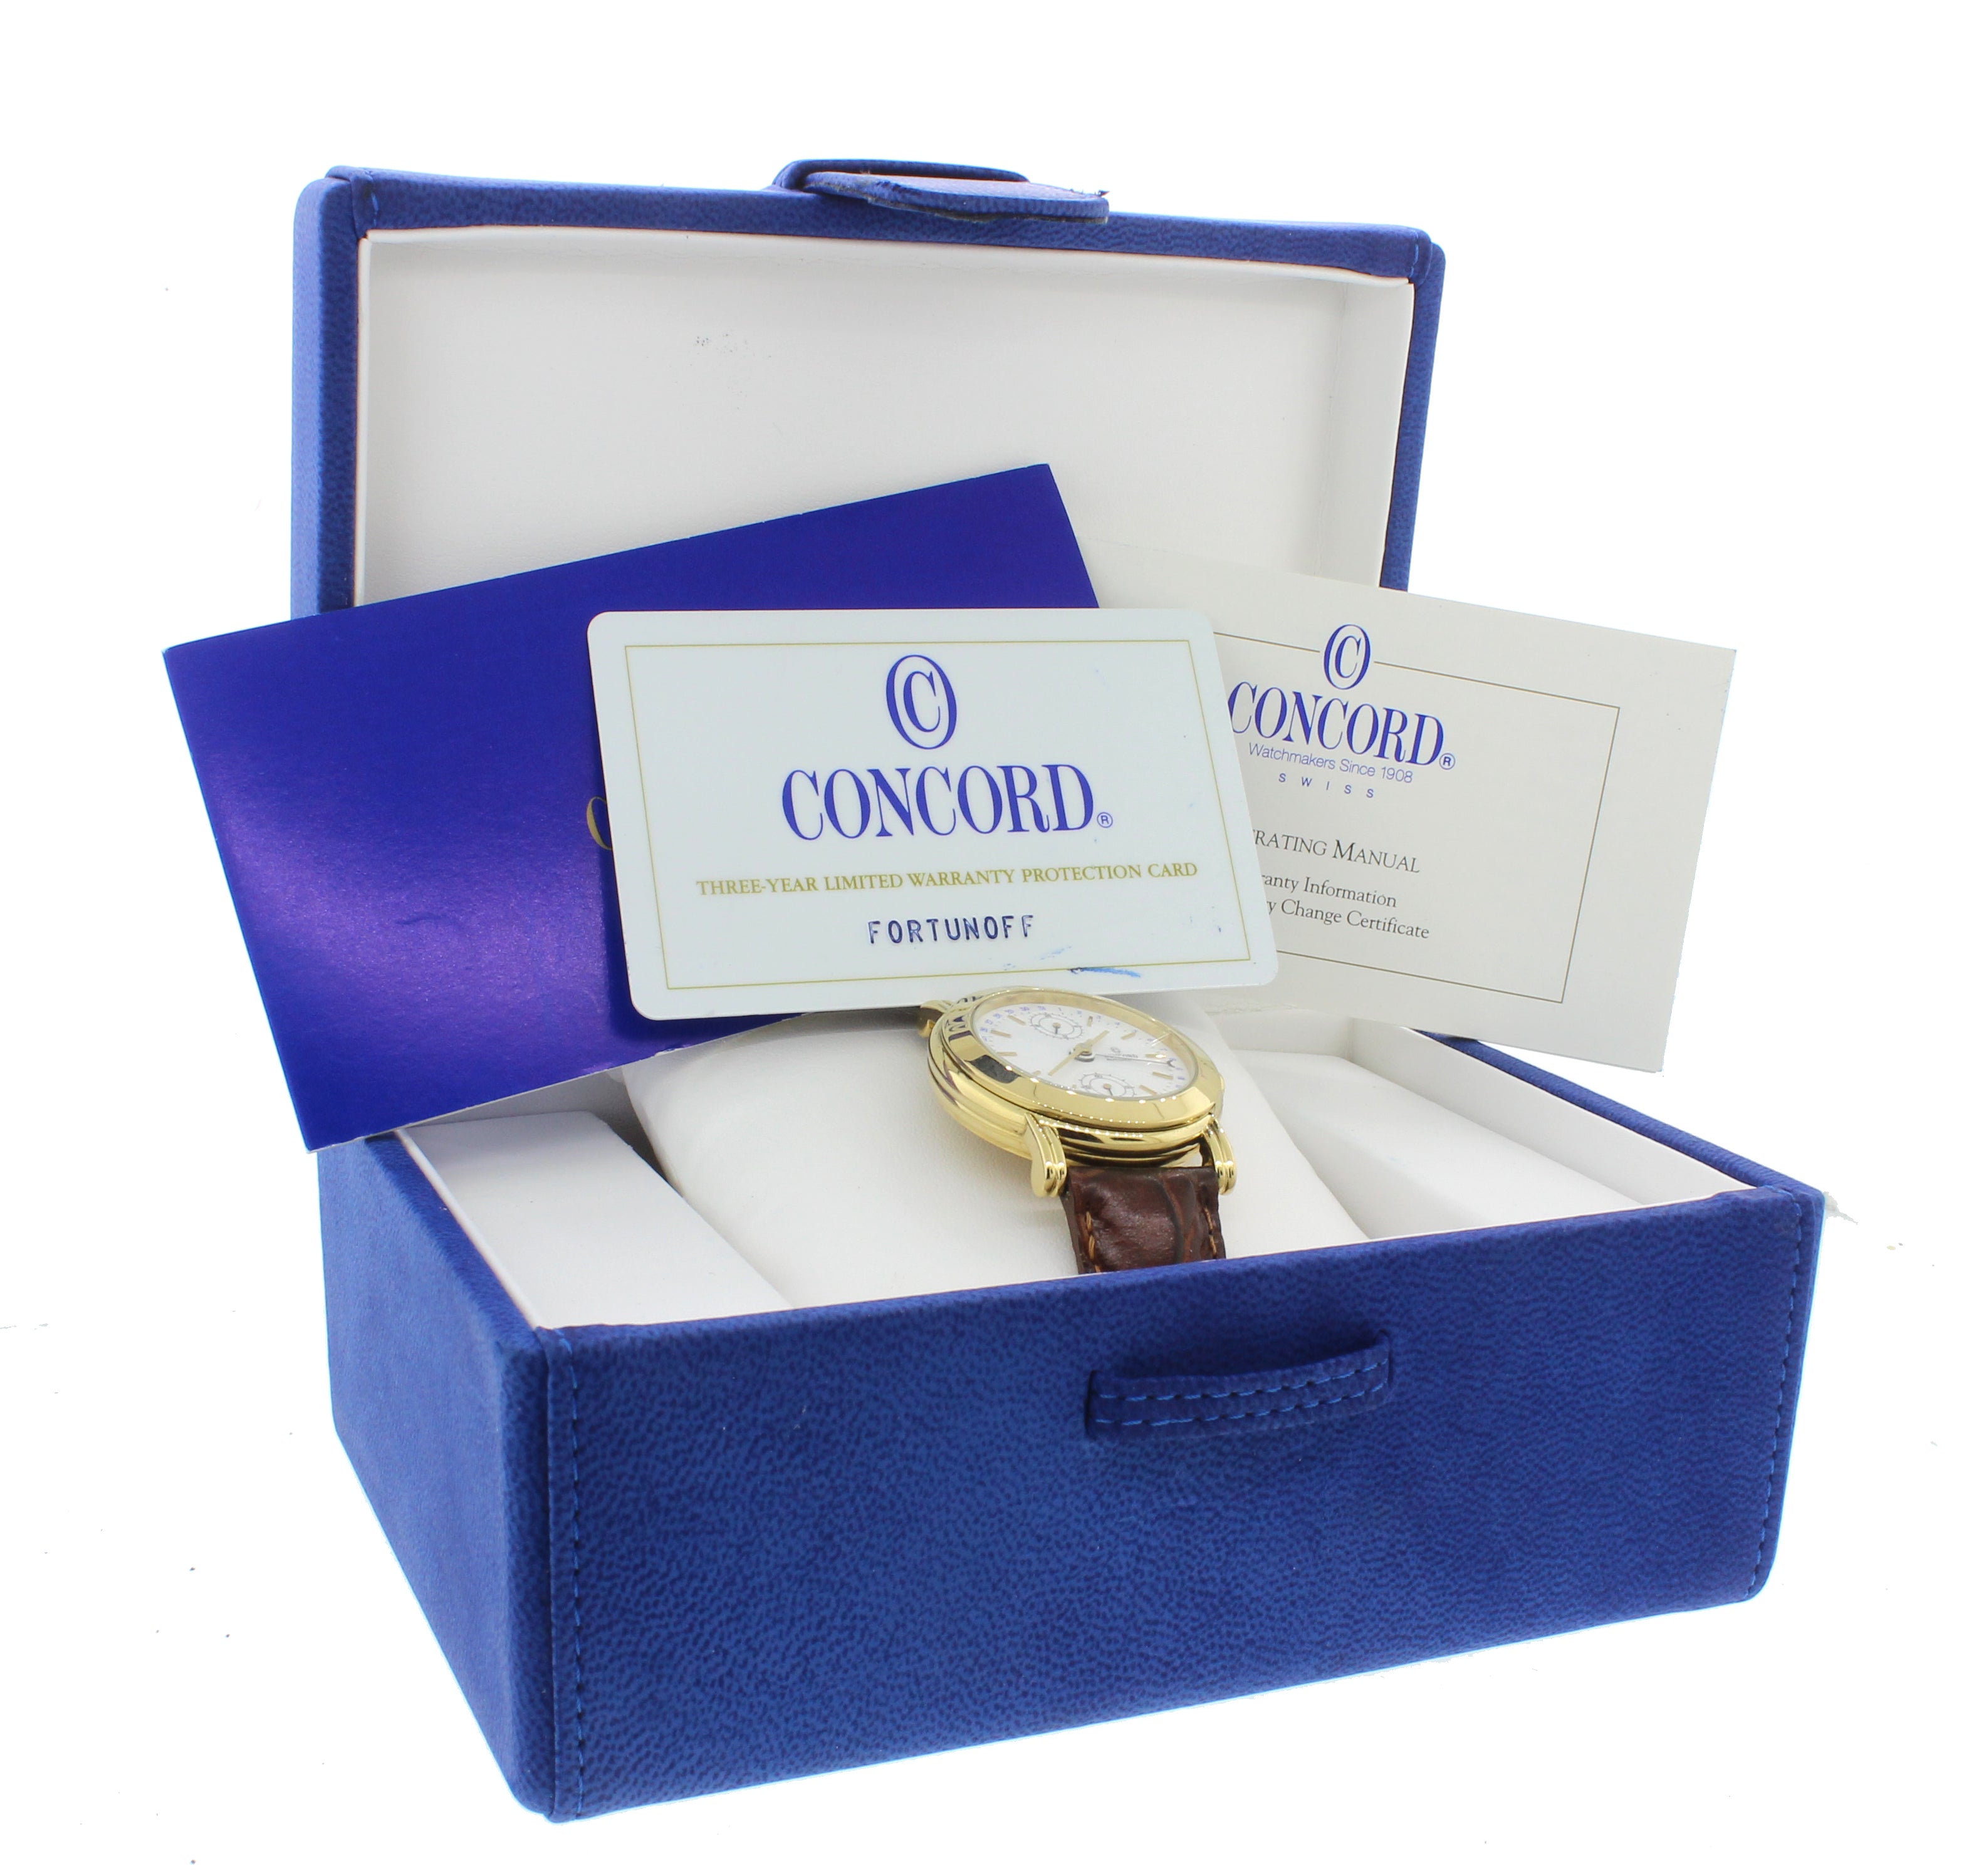 Concord Solid 18k Gold 50B2210 24 Hour Date Automatic 36mm White Watch B&P